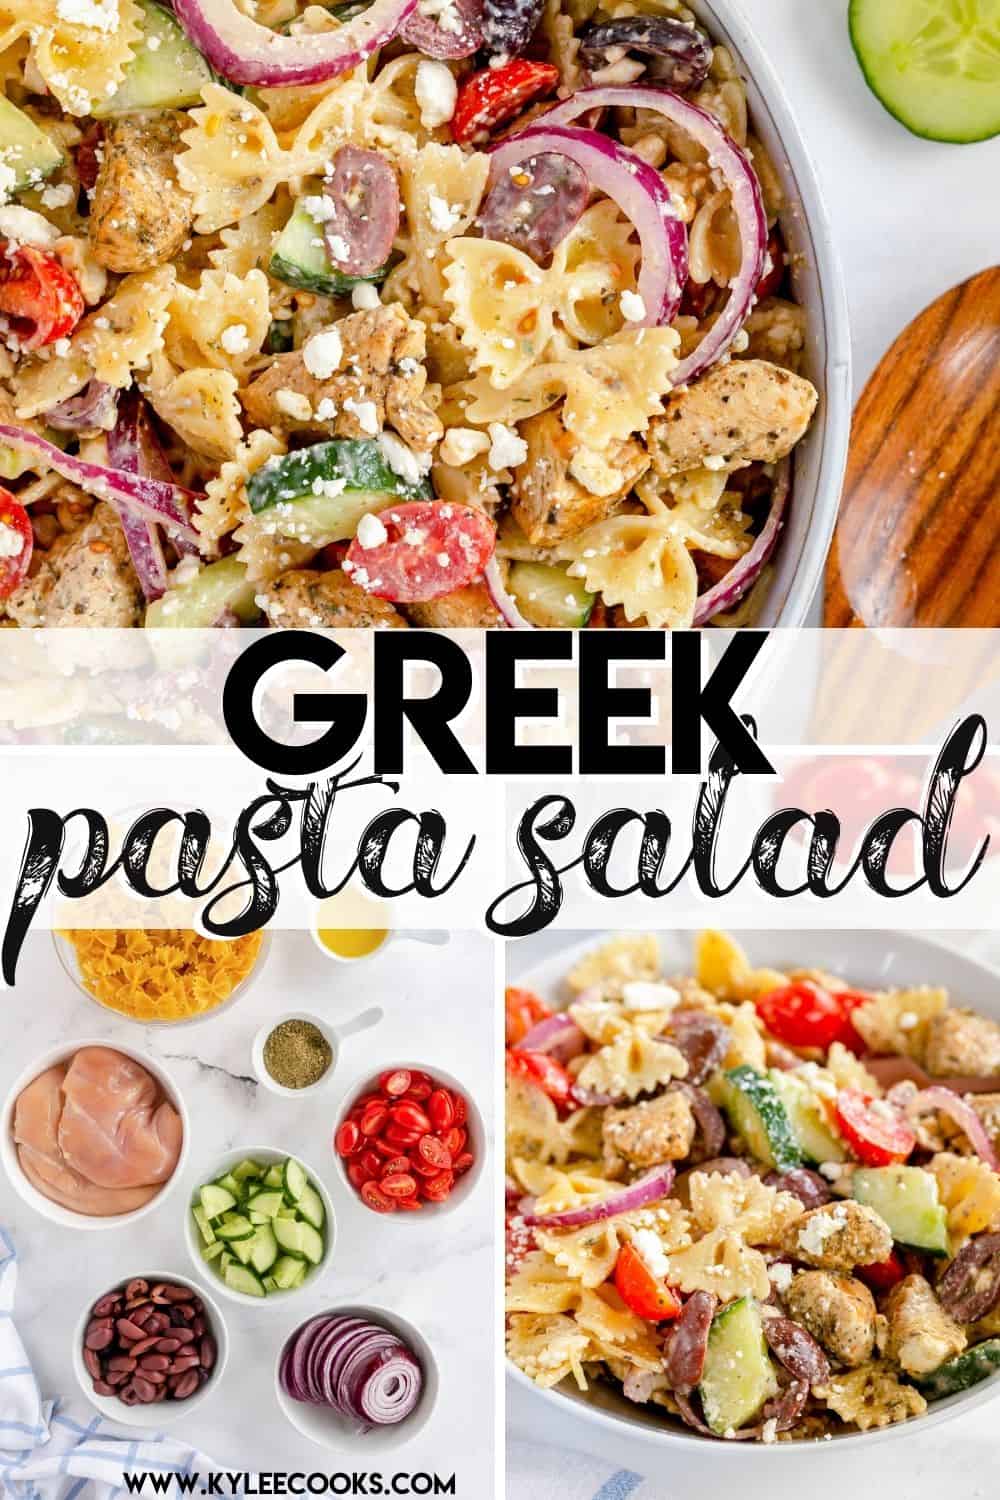 greek pasta salad with ingredients in text overlaid